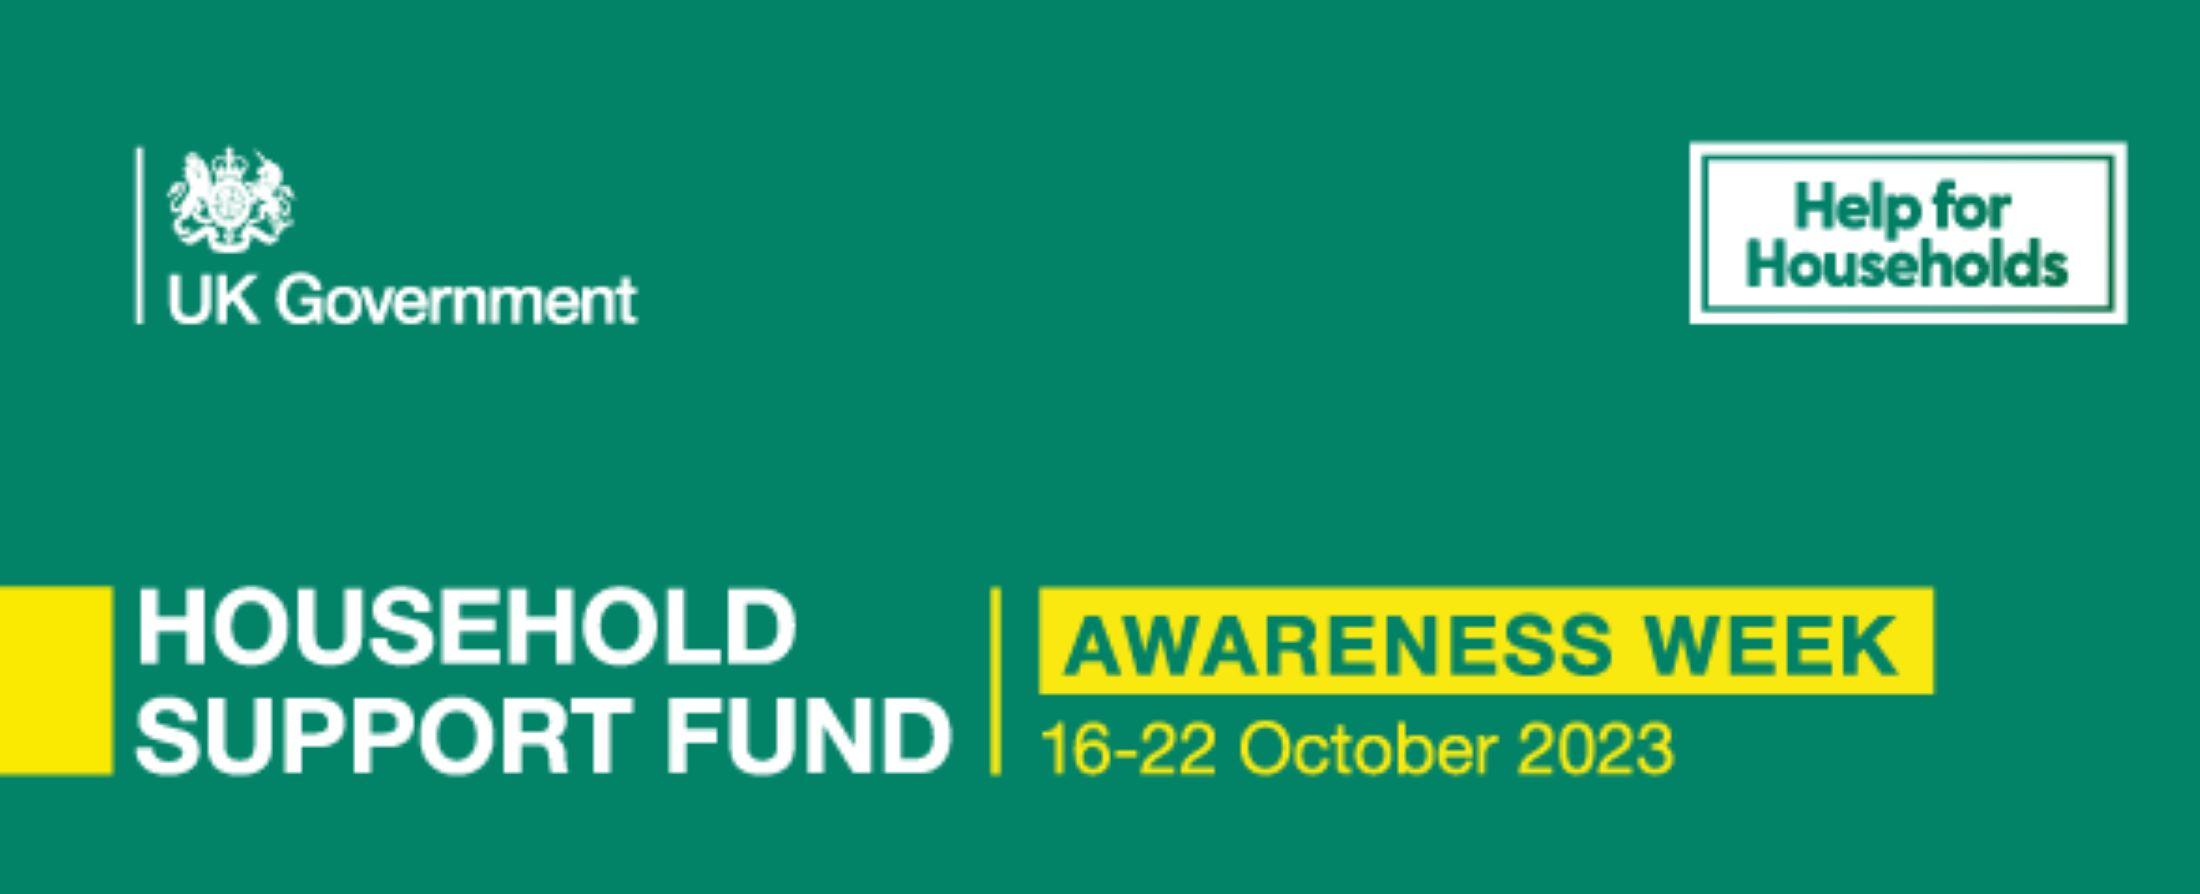 Household Support Fund Awareness Week 2023 graphic